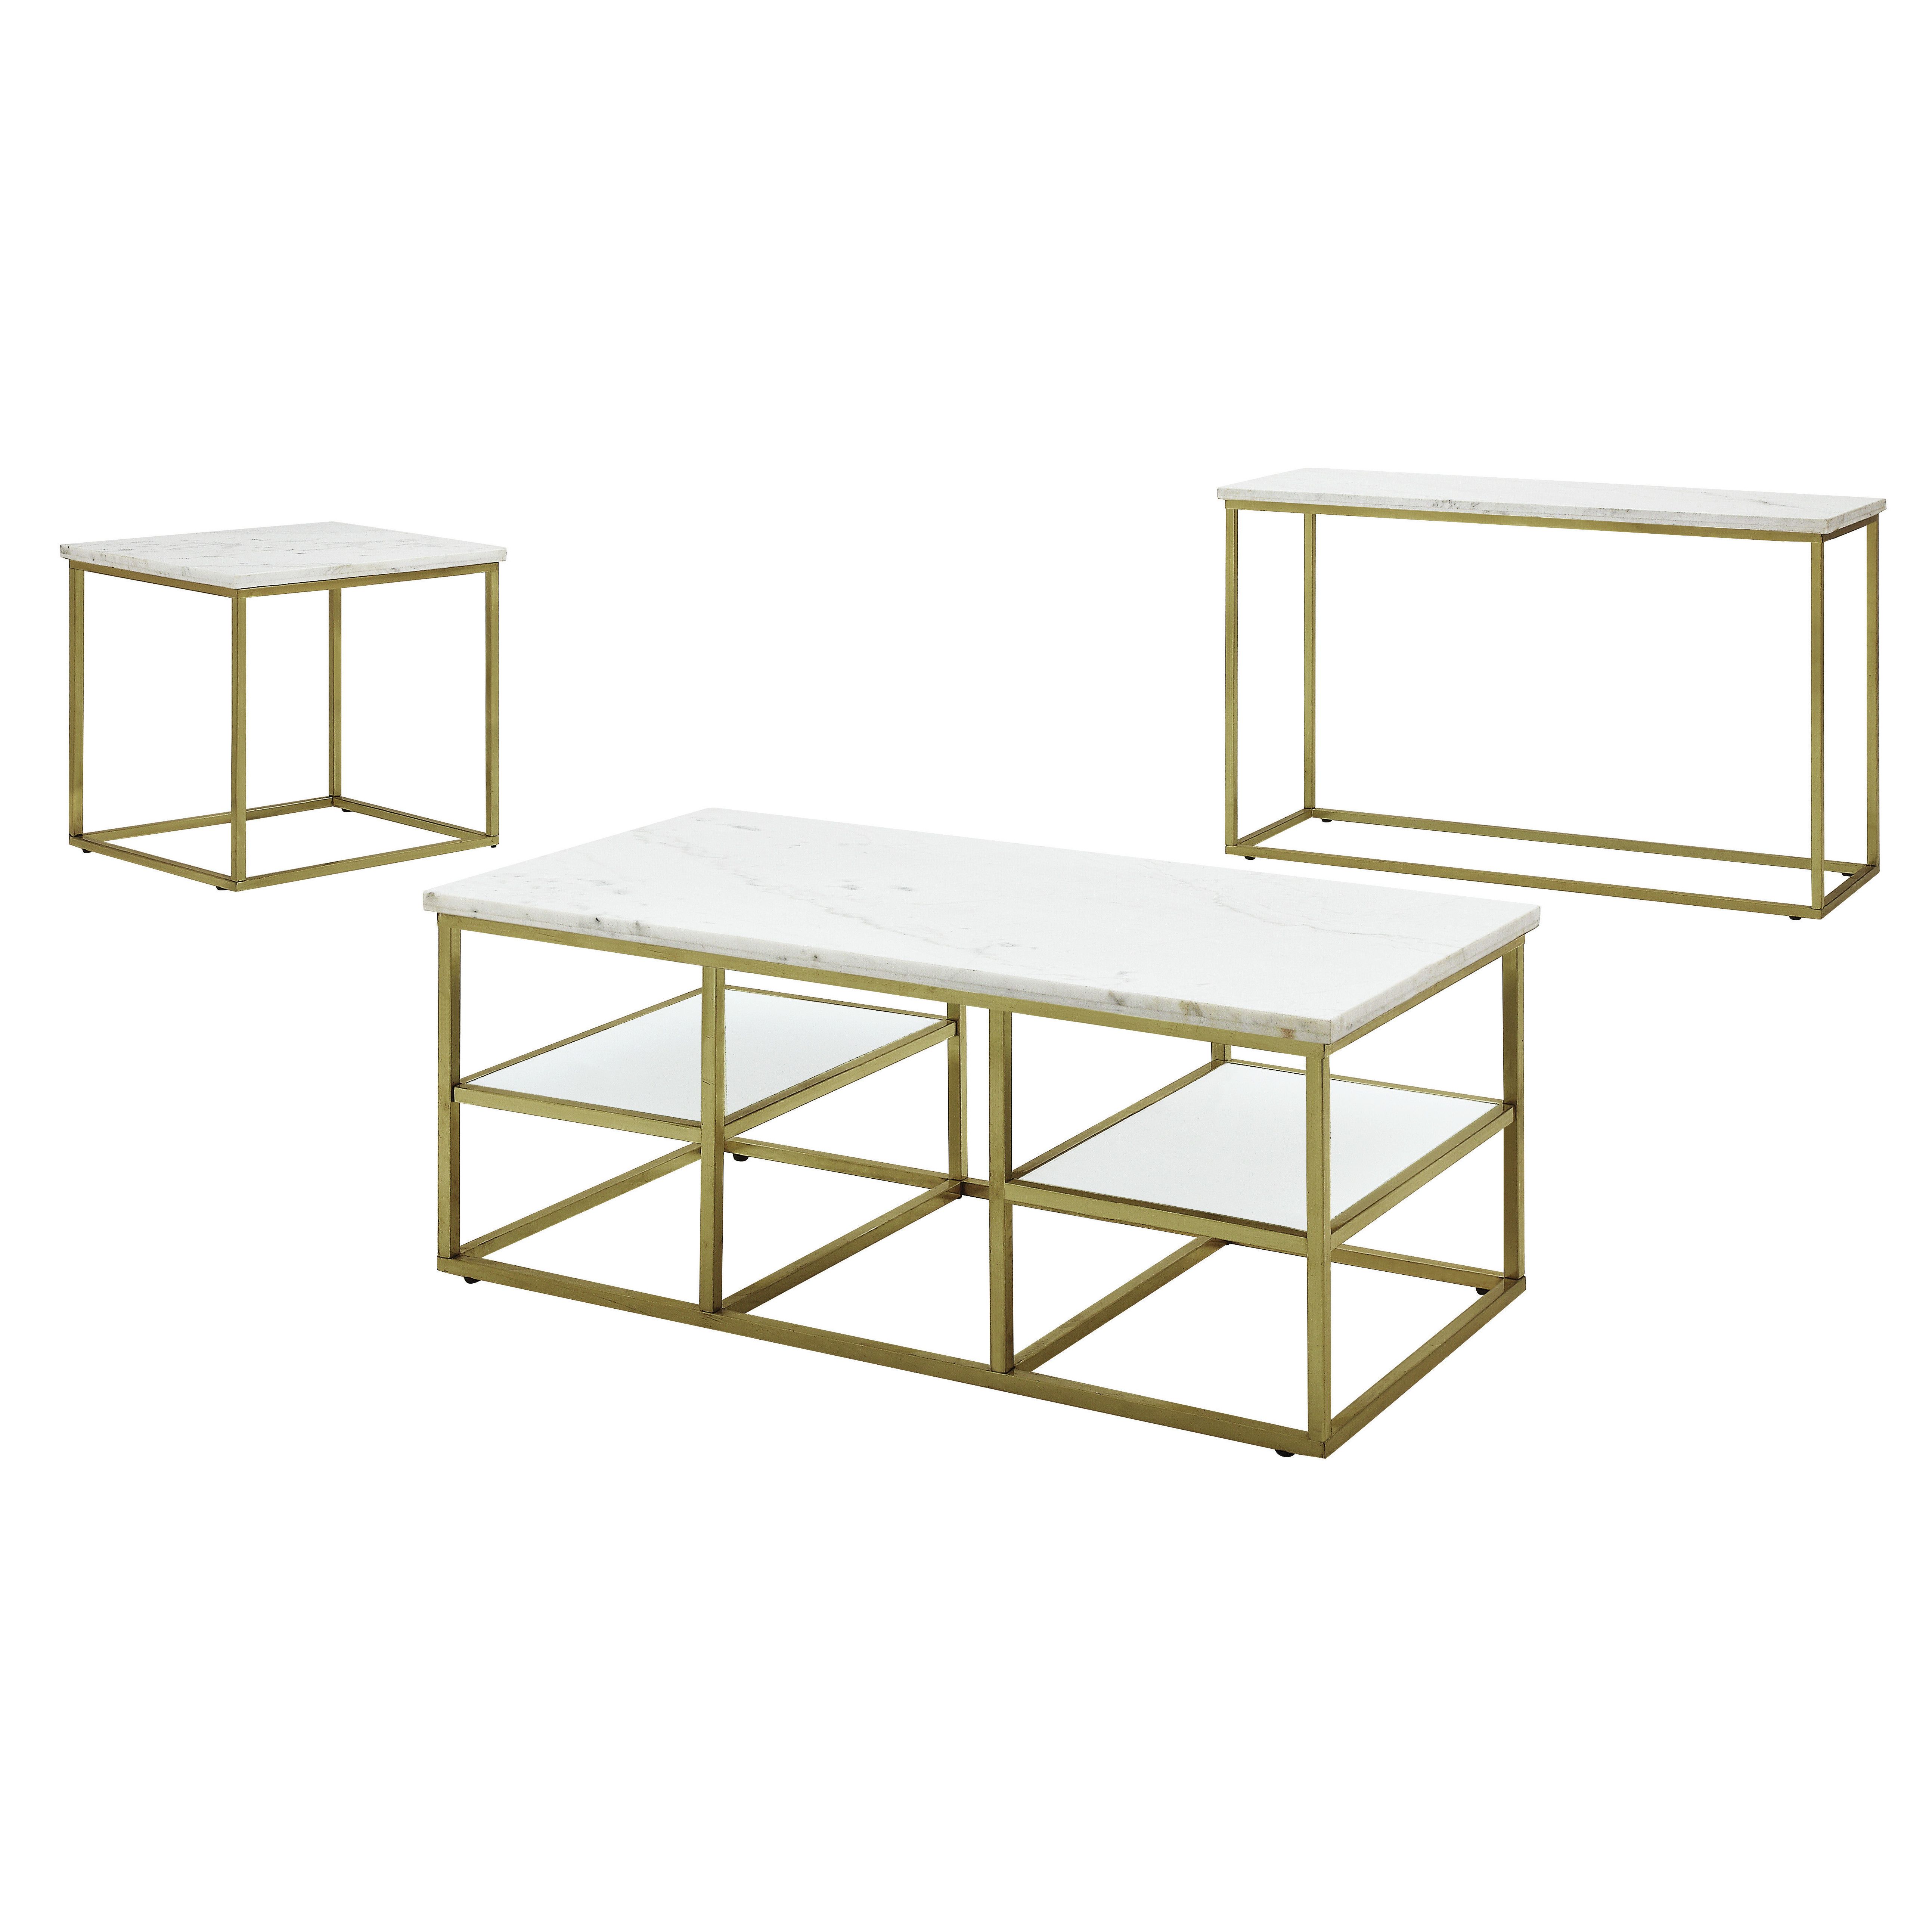 isabelle end table home wishlist tables chrome metal glass accent console sofa with shelf donny osmond mini lamps kmart plastic covers living room wall clock crystal drawer knobs